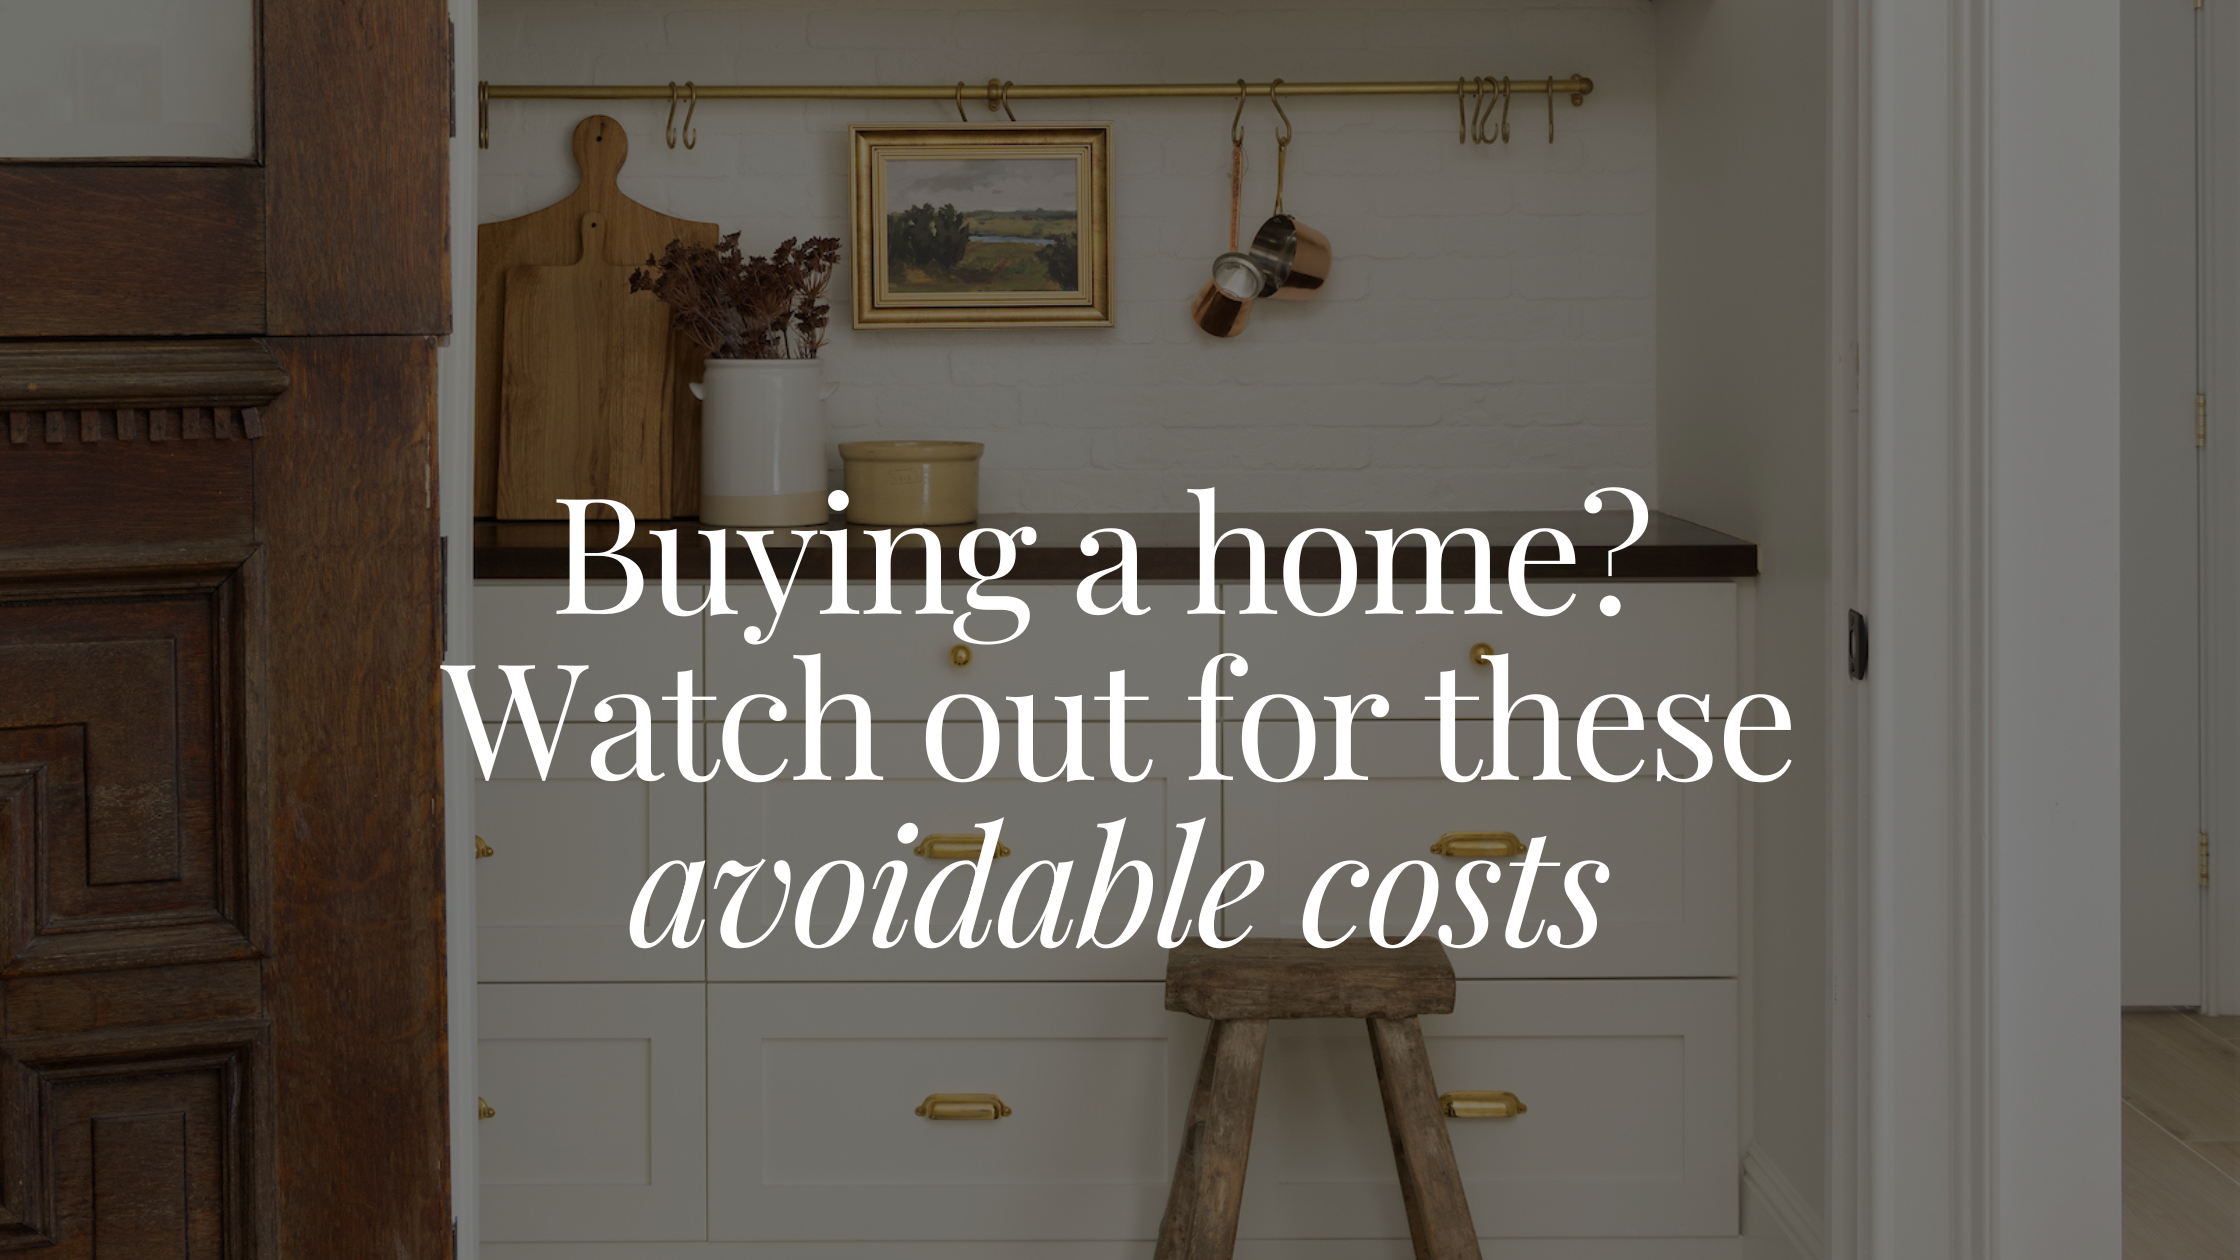 Buying a home? Watch out for these avoidable costs